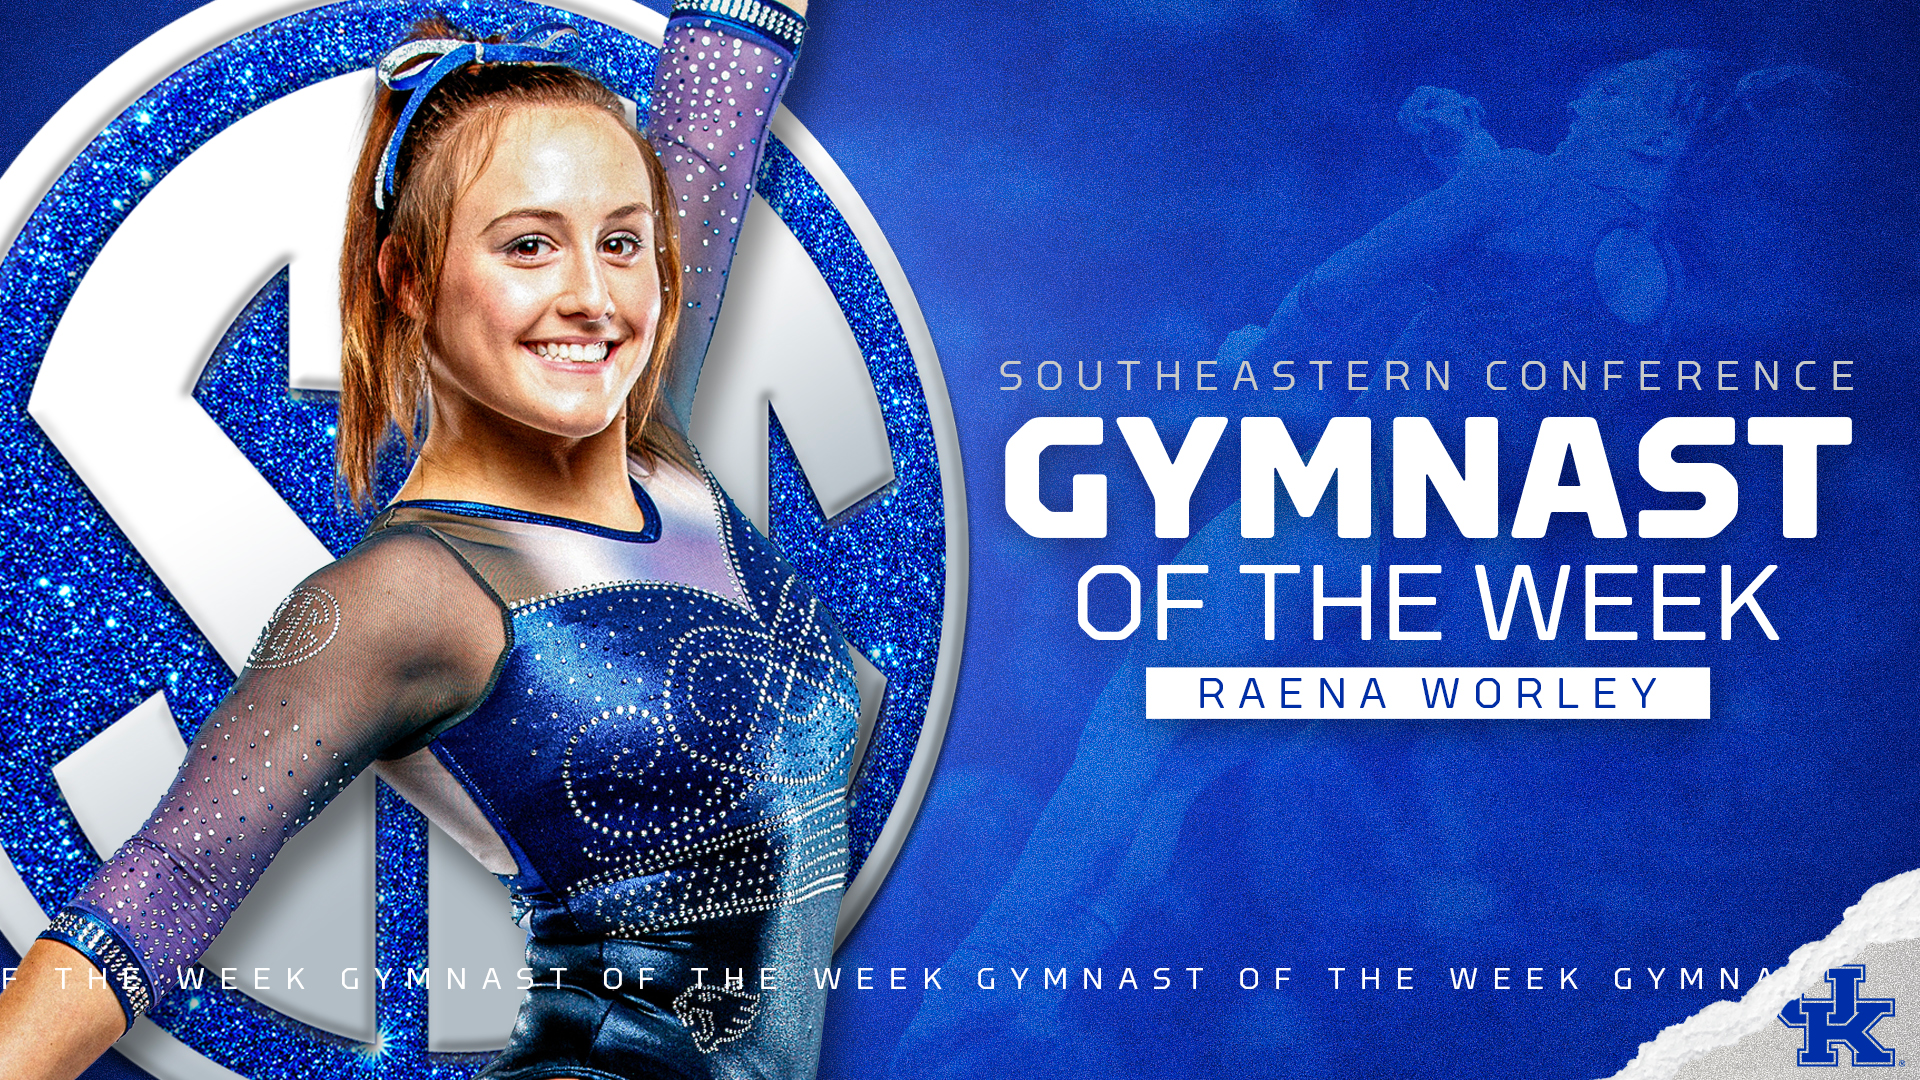 Raena Worley Wins SEC Gymnast of the Week for Second Time